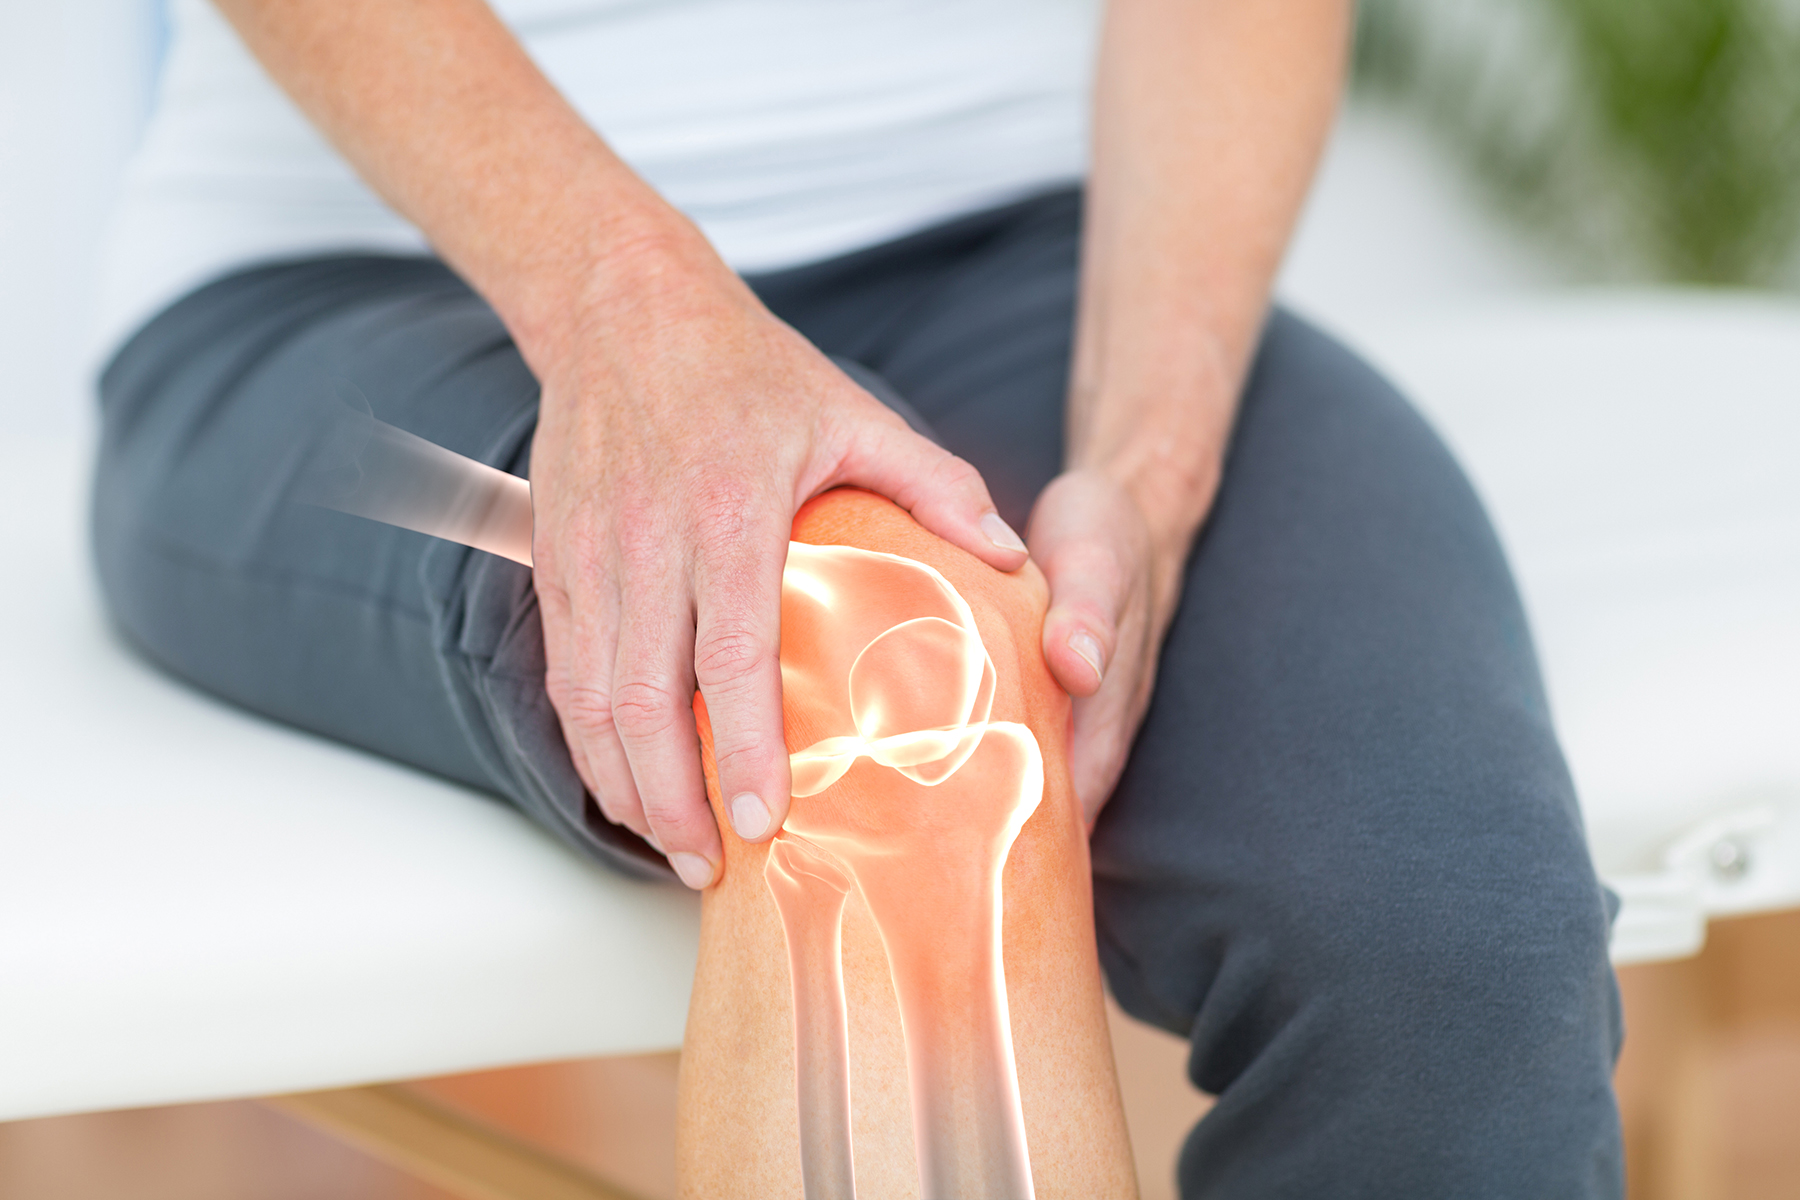 Can Stem Cell Therapy Provide Relief From Chronic Knee Pain?